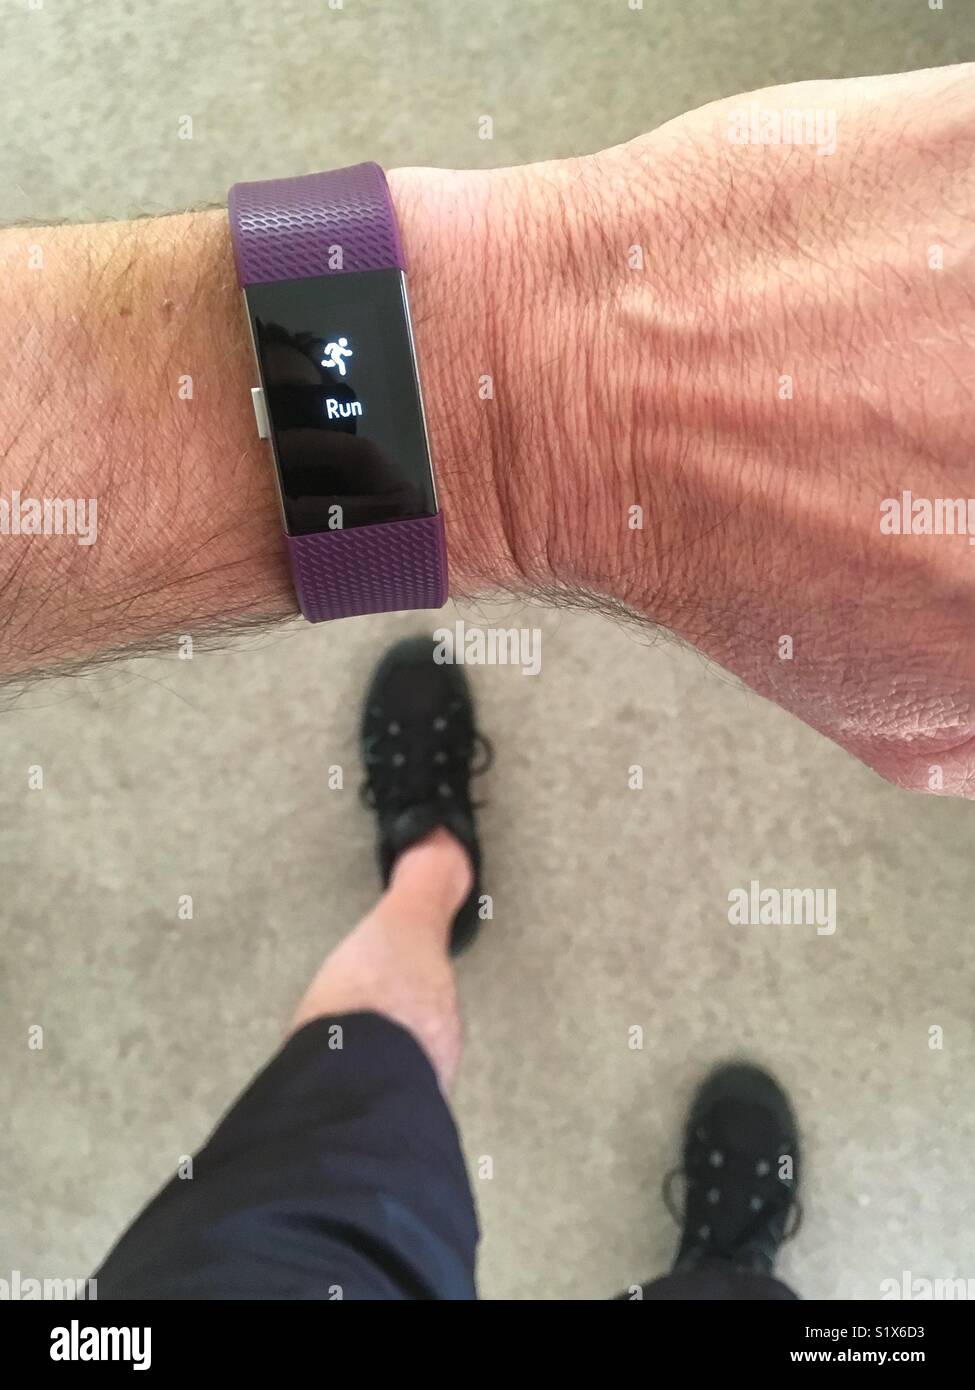 fitbit charge 2 running